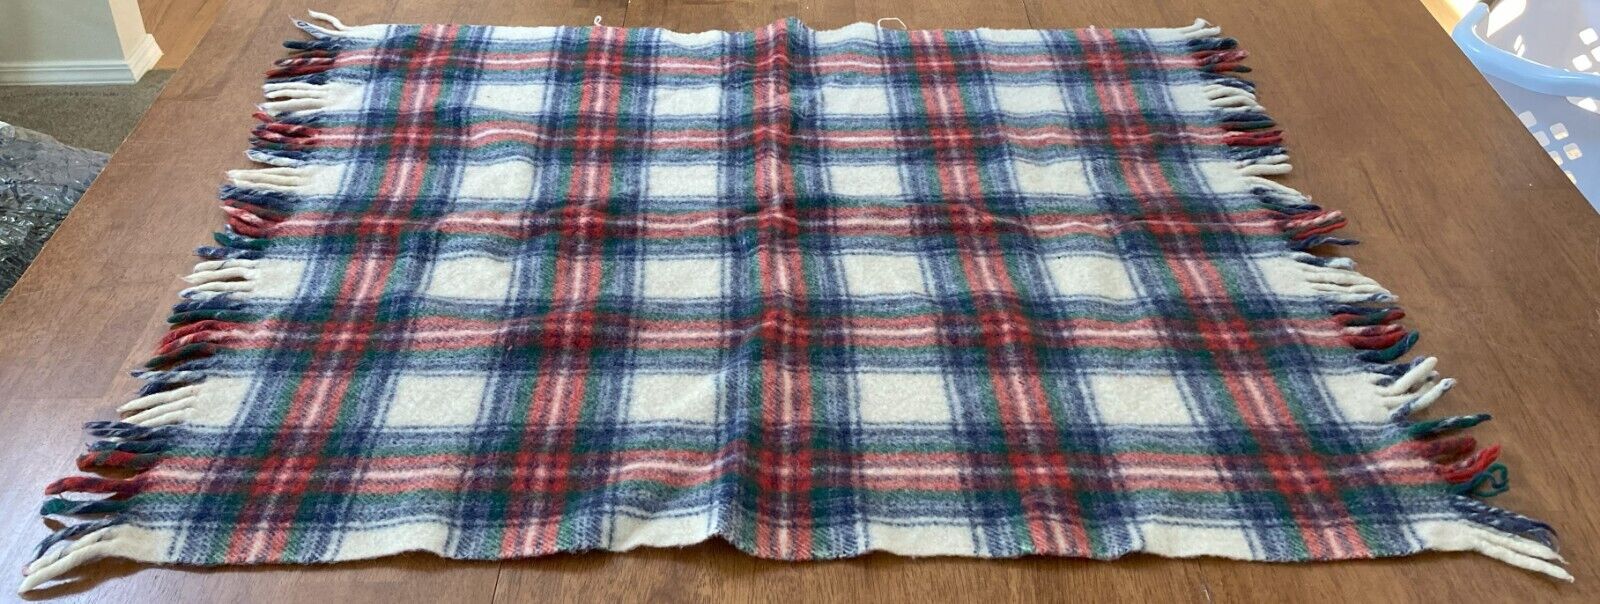 1950’s WOOL PLAID BLANKET  Tartan VINTAGE (Red, white, blue and green)